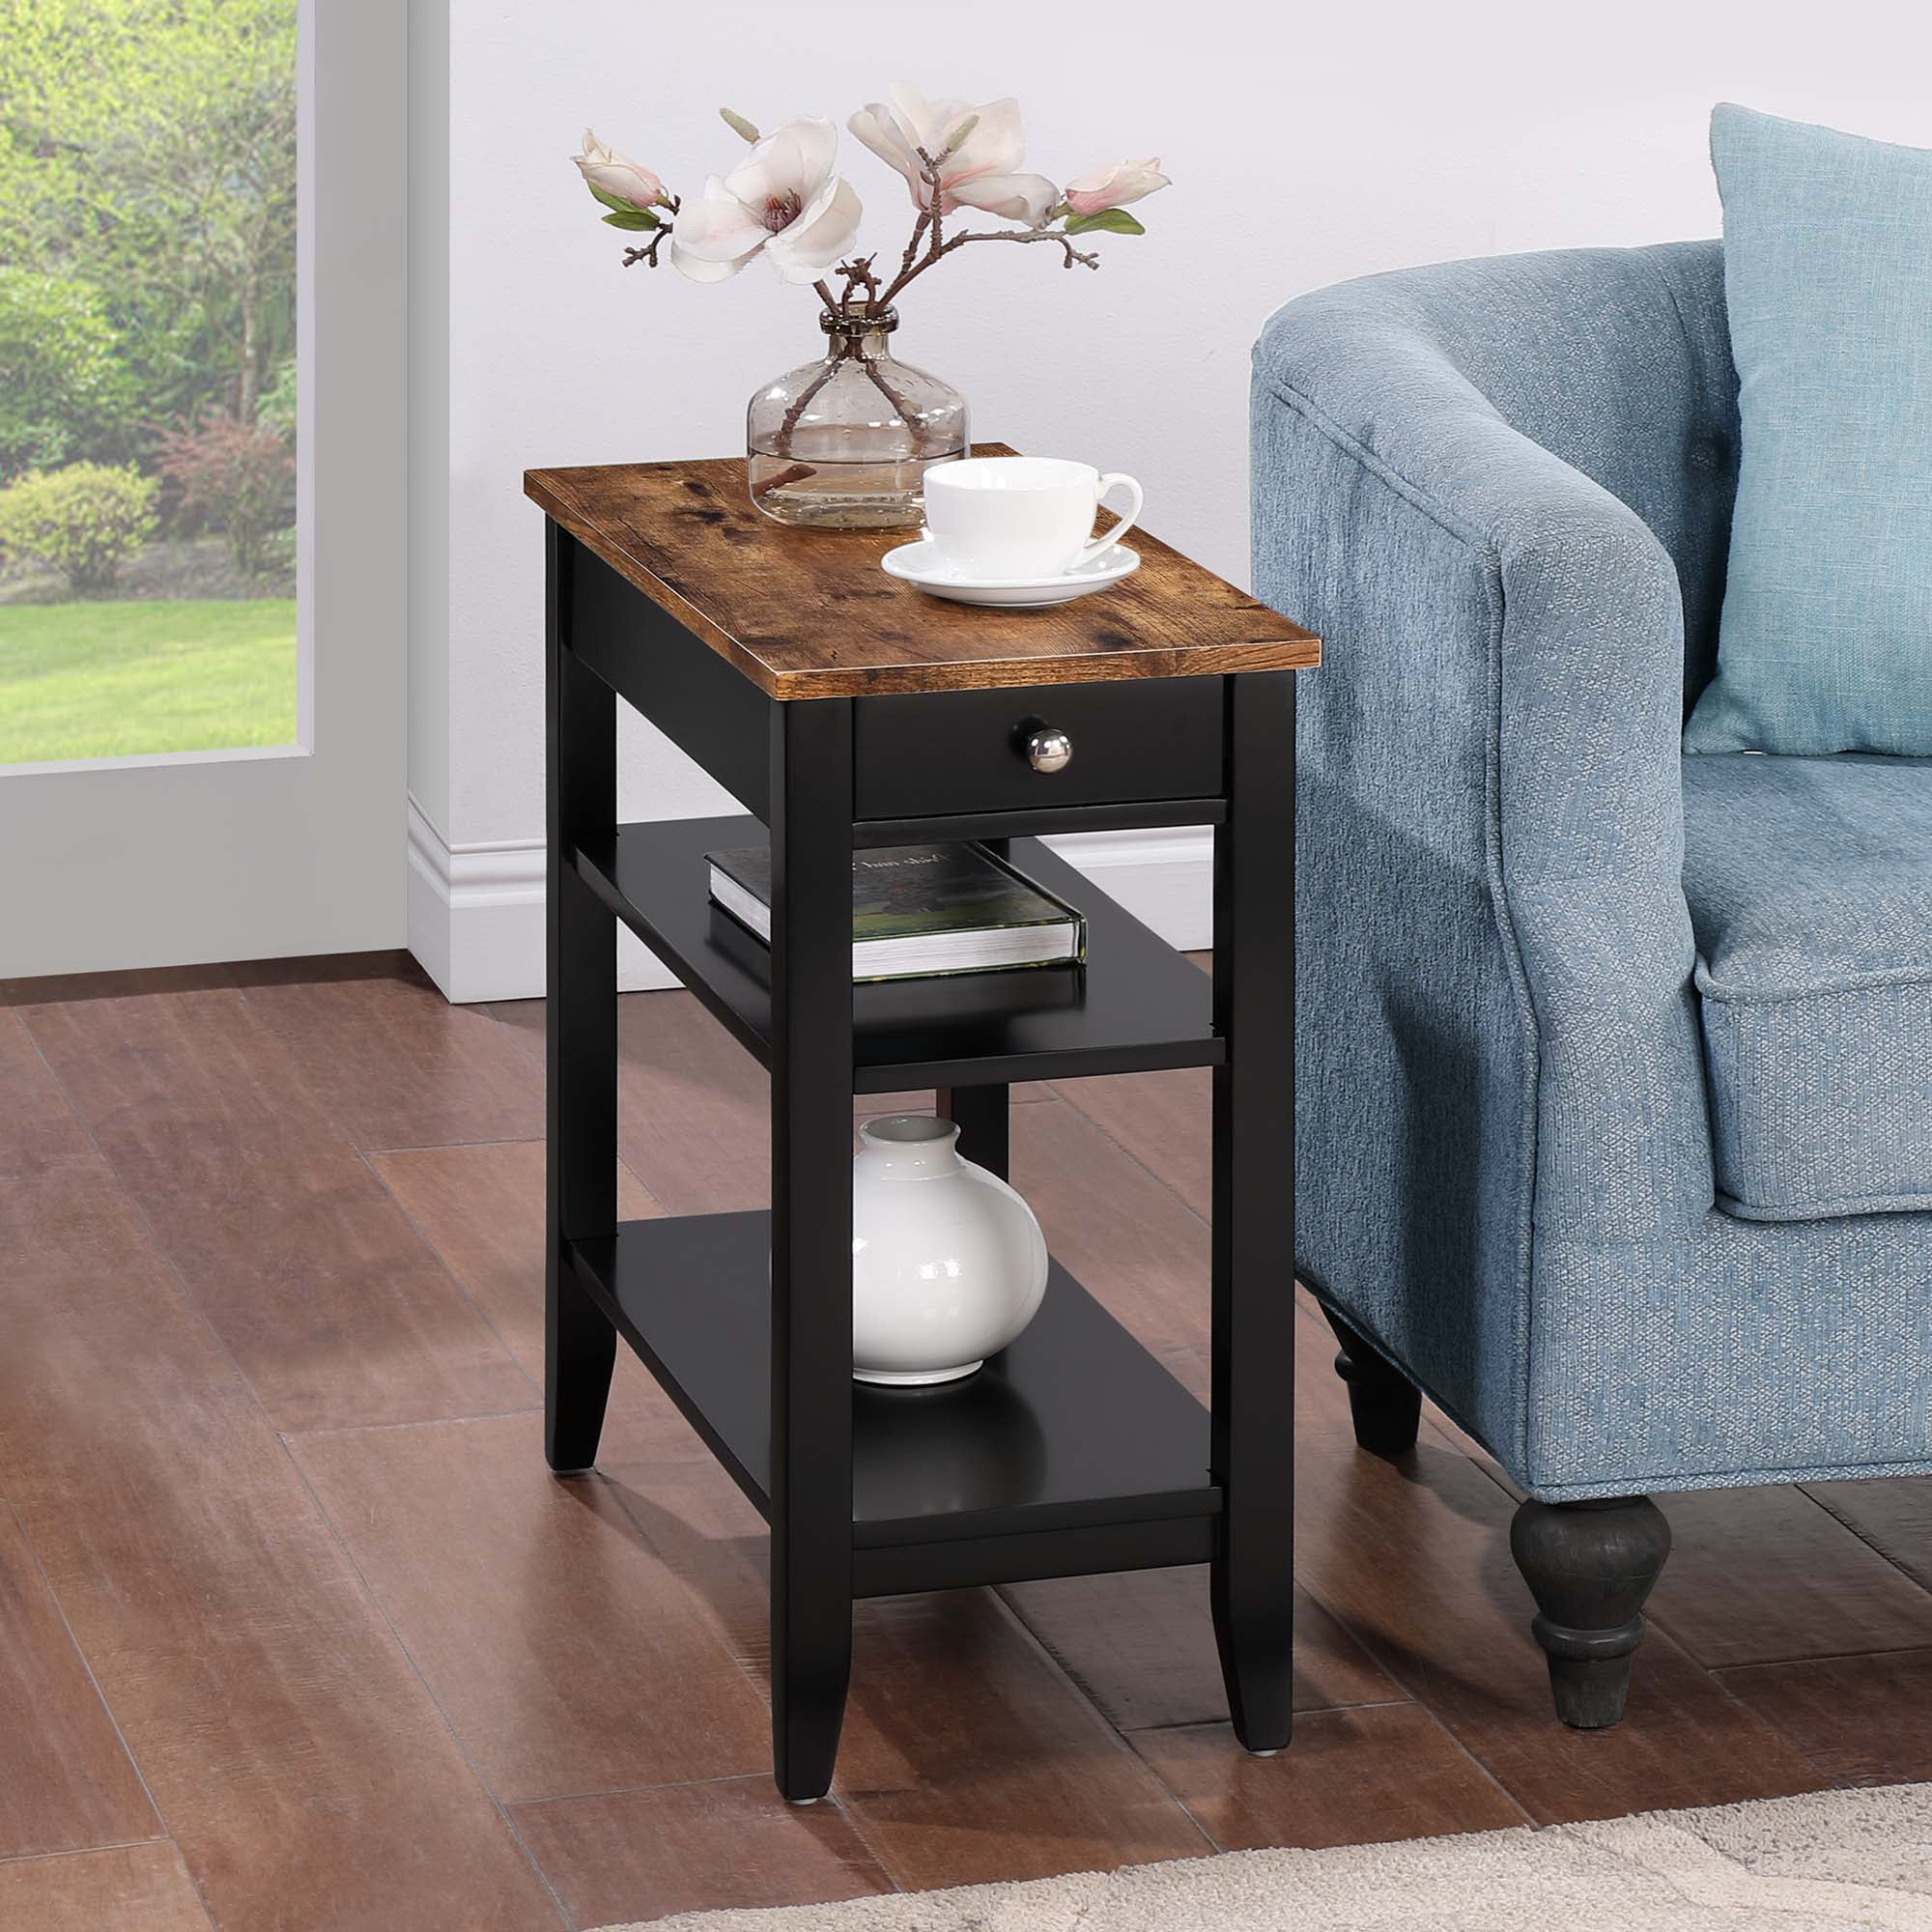 23.50 x 11.25 x 24 in. American Heritage 1 Drawer Chairside End Table with Shelves, Barnwood & Black -  Convenience Concepts, HI2835972